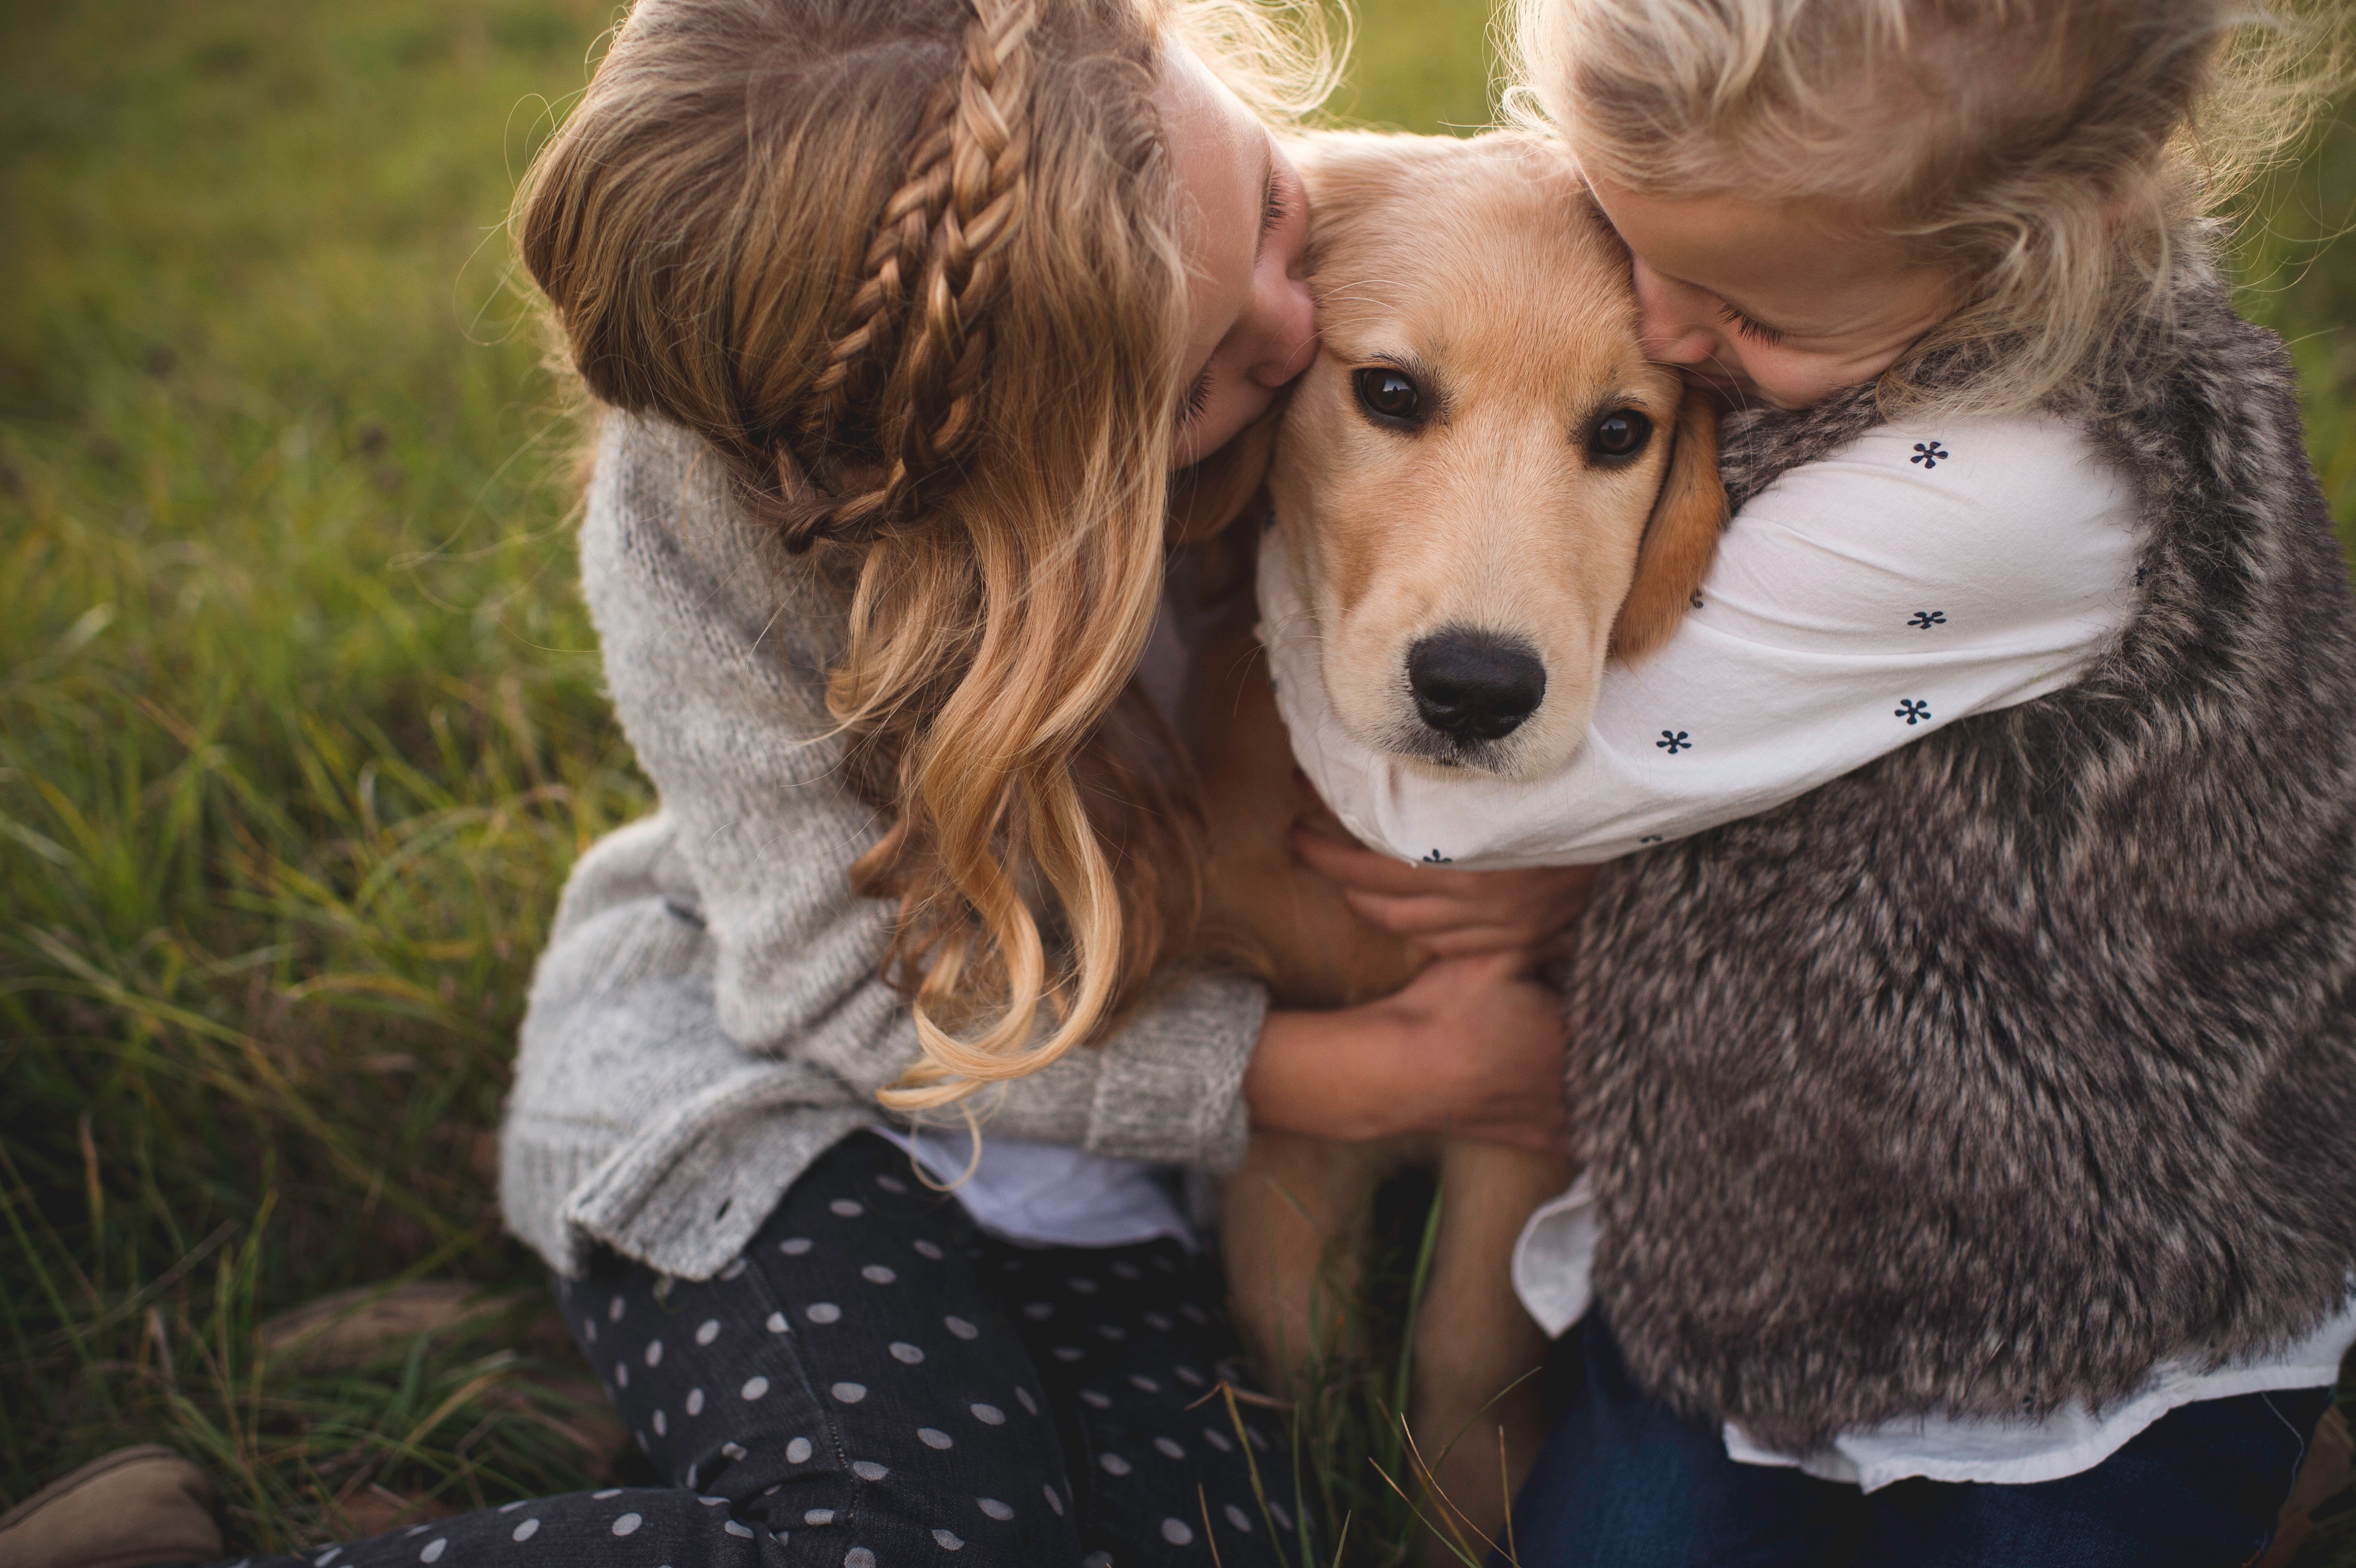 Practicing parenthood with a pet dog can help prepare for human children.